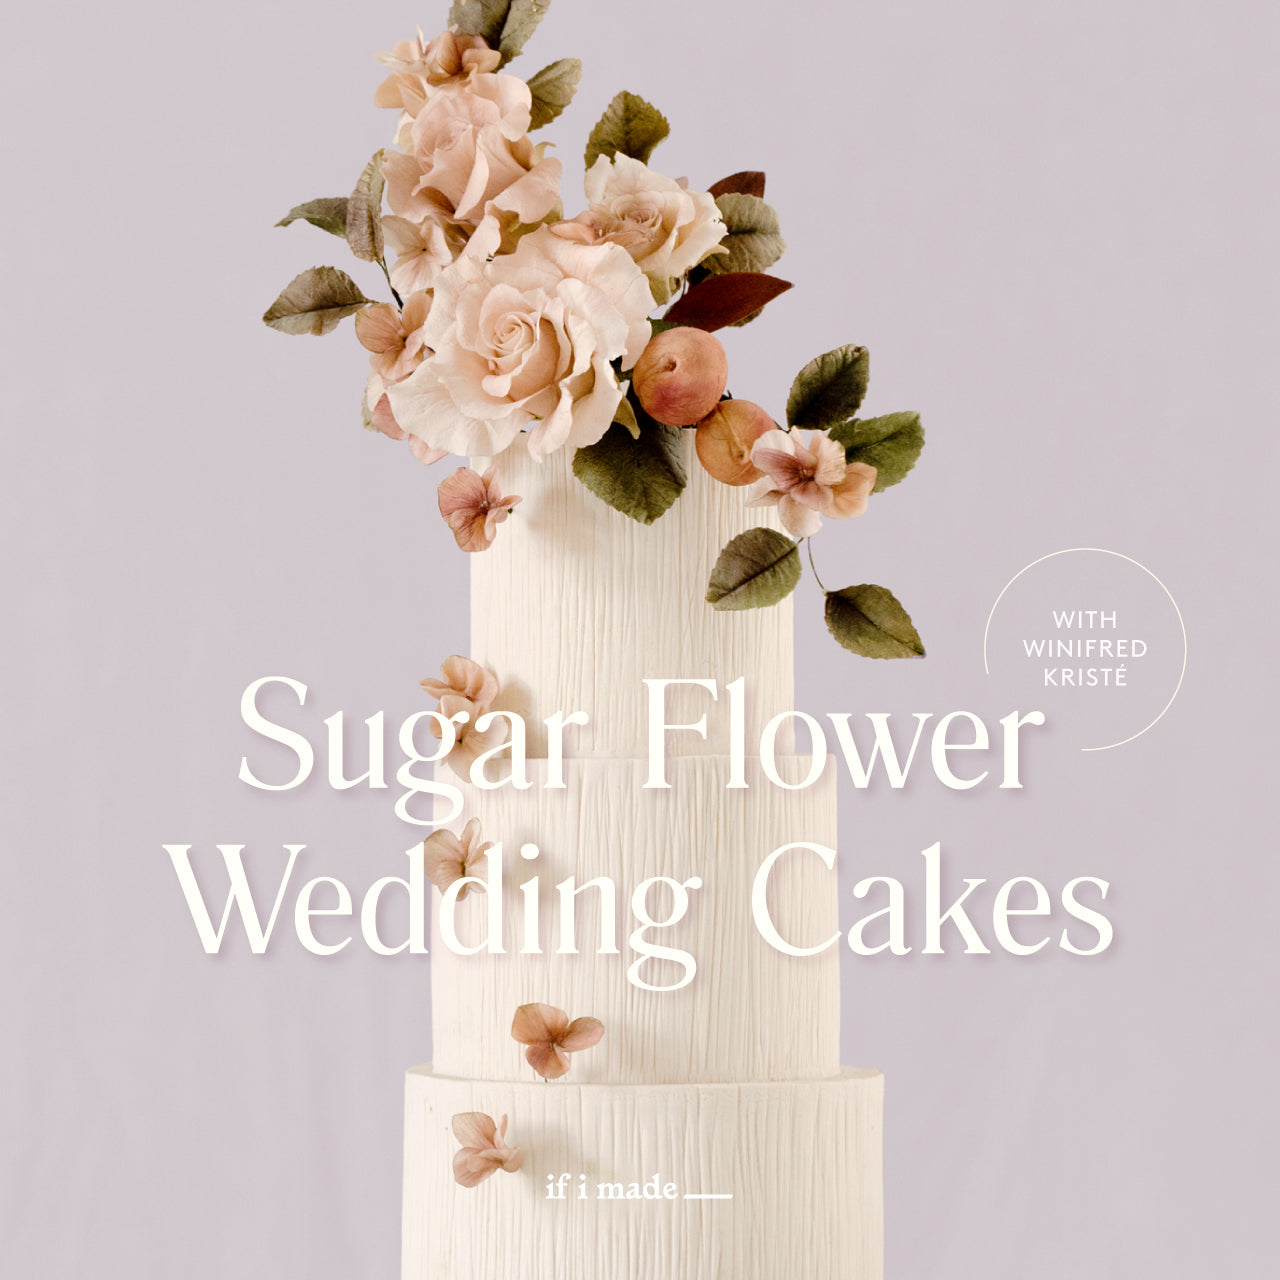 Sugar Flower Wedding Cakes with Winifred Kriste (SPP0320)- 13 Payments of $99